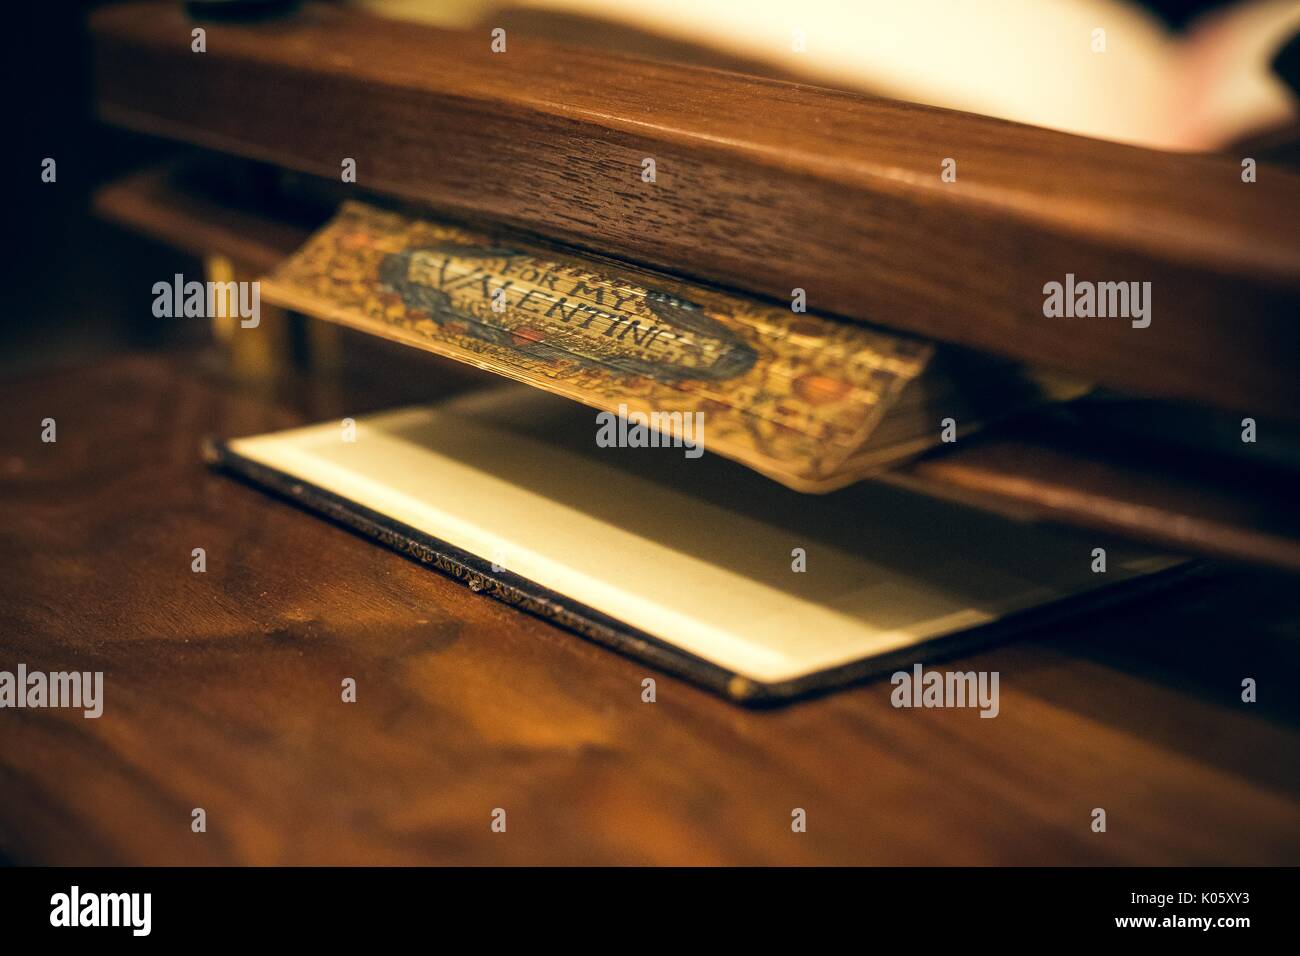 Spine of a book with illustration reading 'For my Valentine' between two panels of wood, 2016. Stock Photo